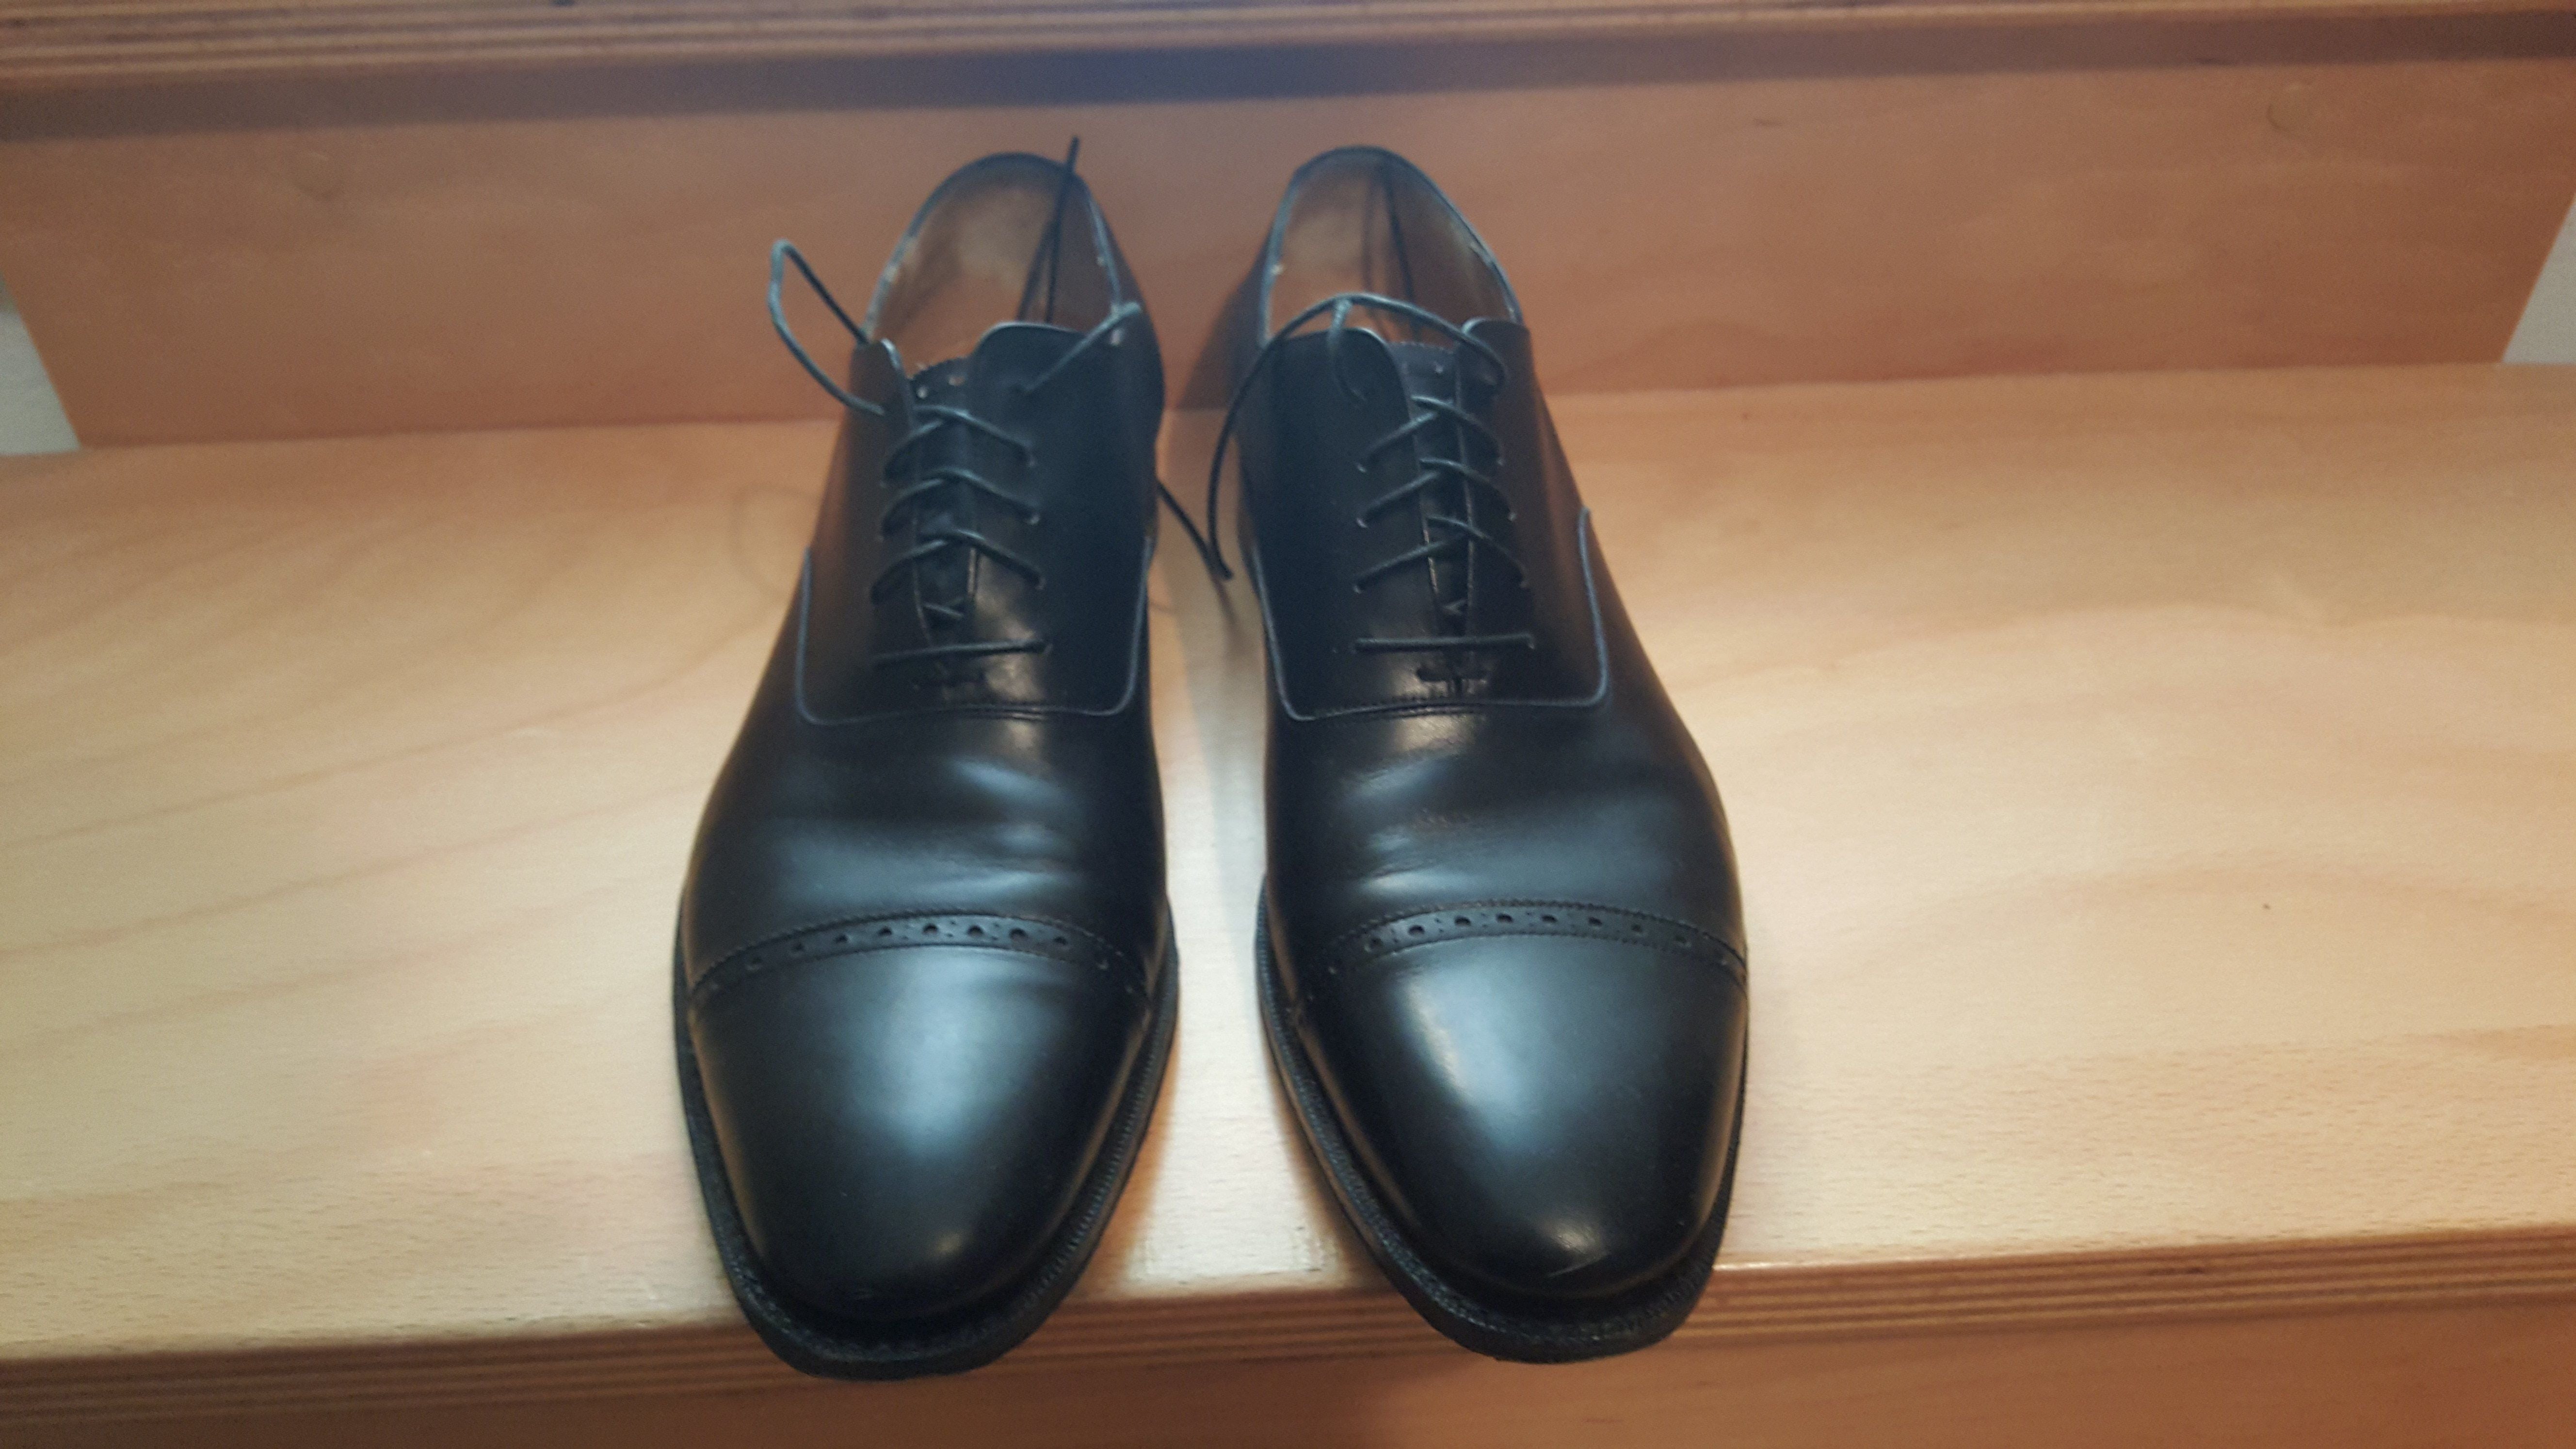 How to tell if these Ferragamo shoes are real? | Men's Clothing Forums